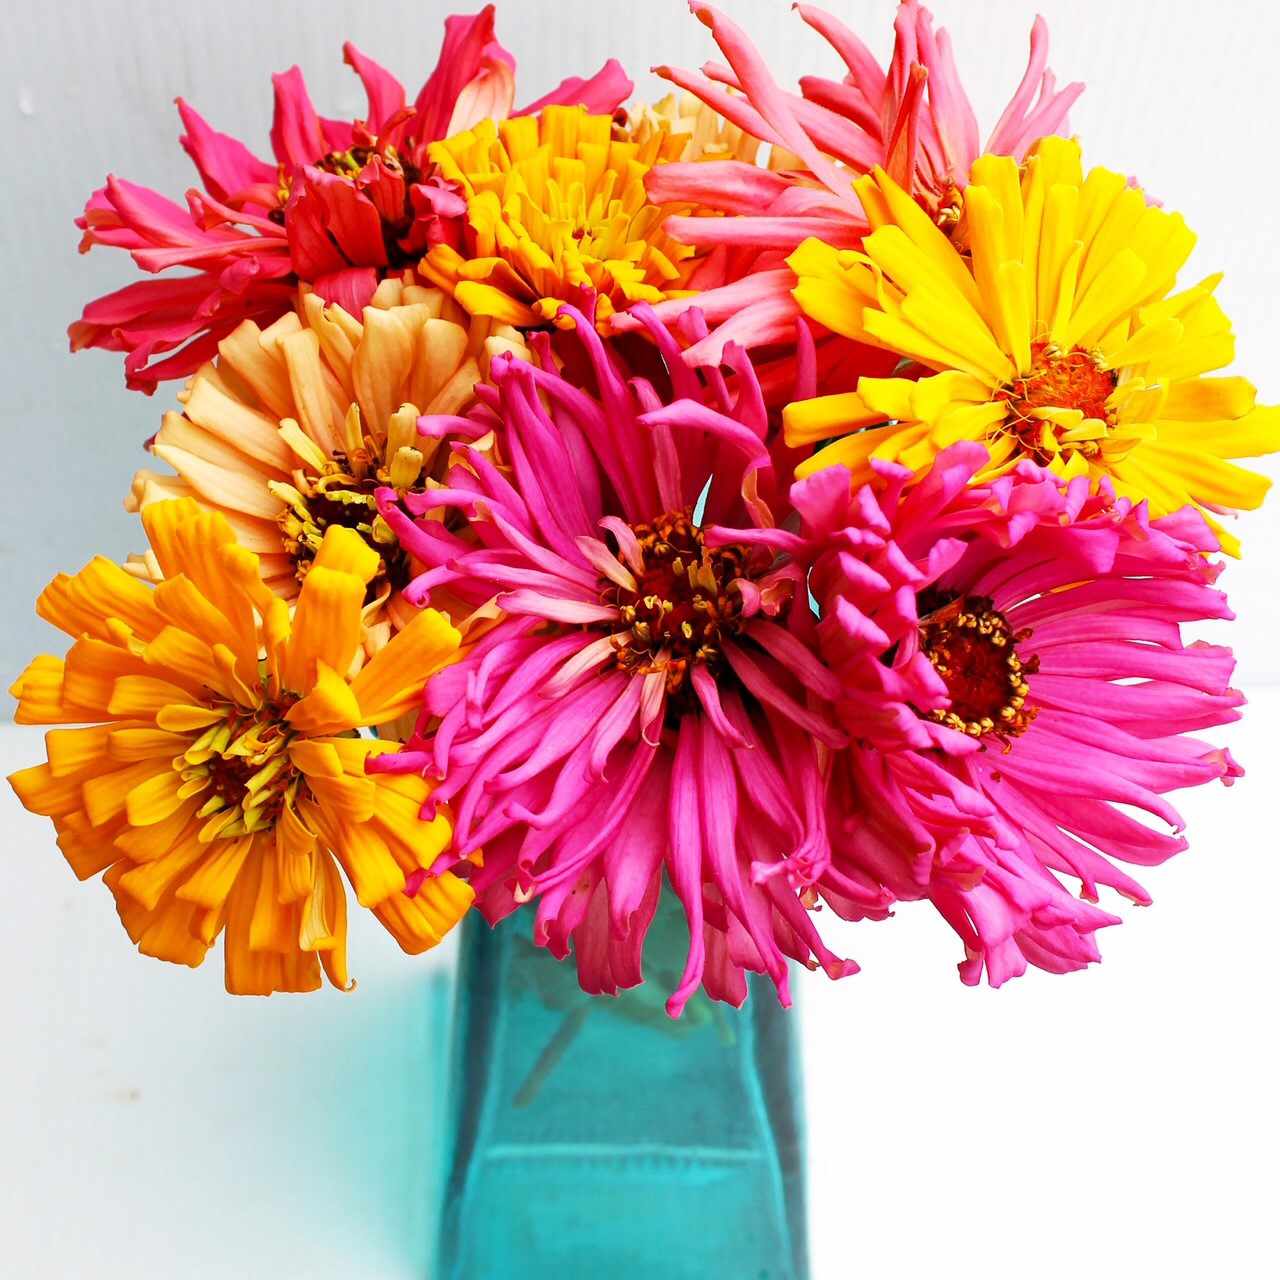 cactus-flowered zinnias in a glass vase